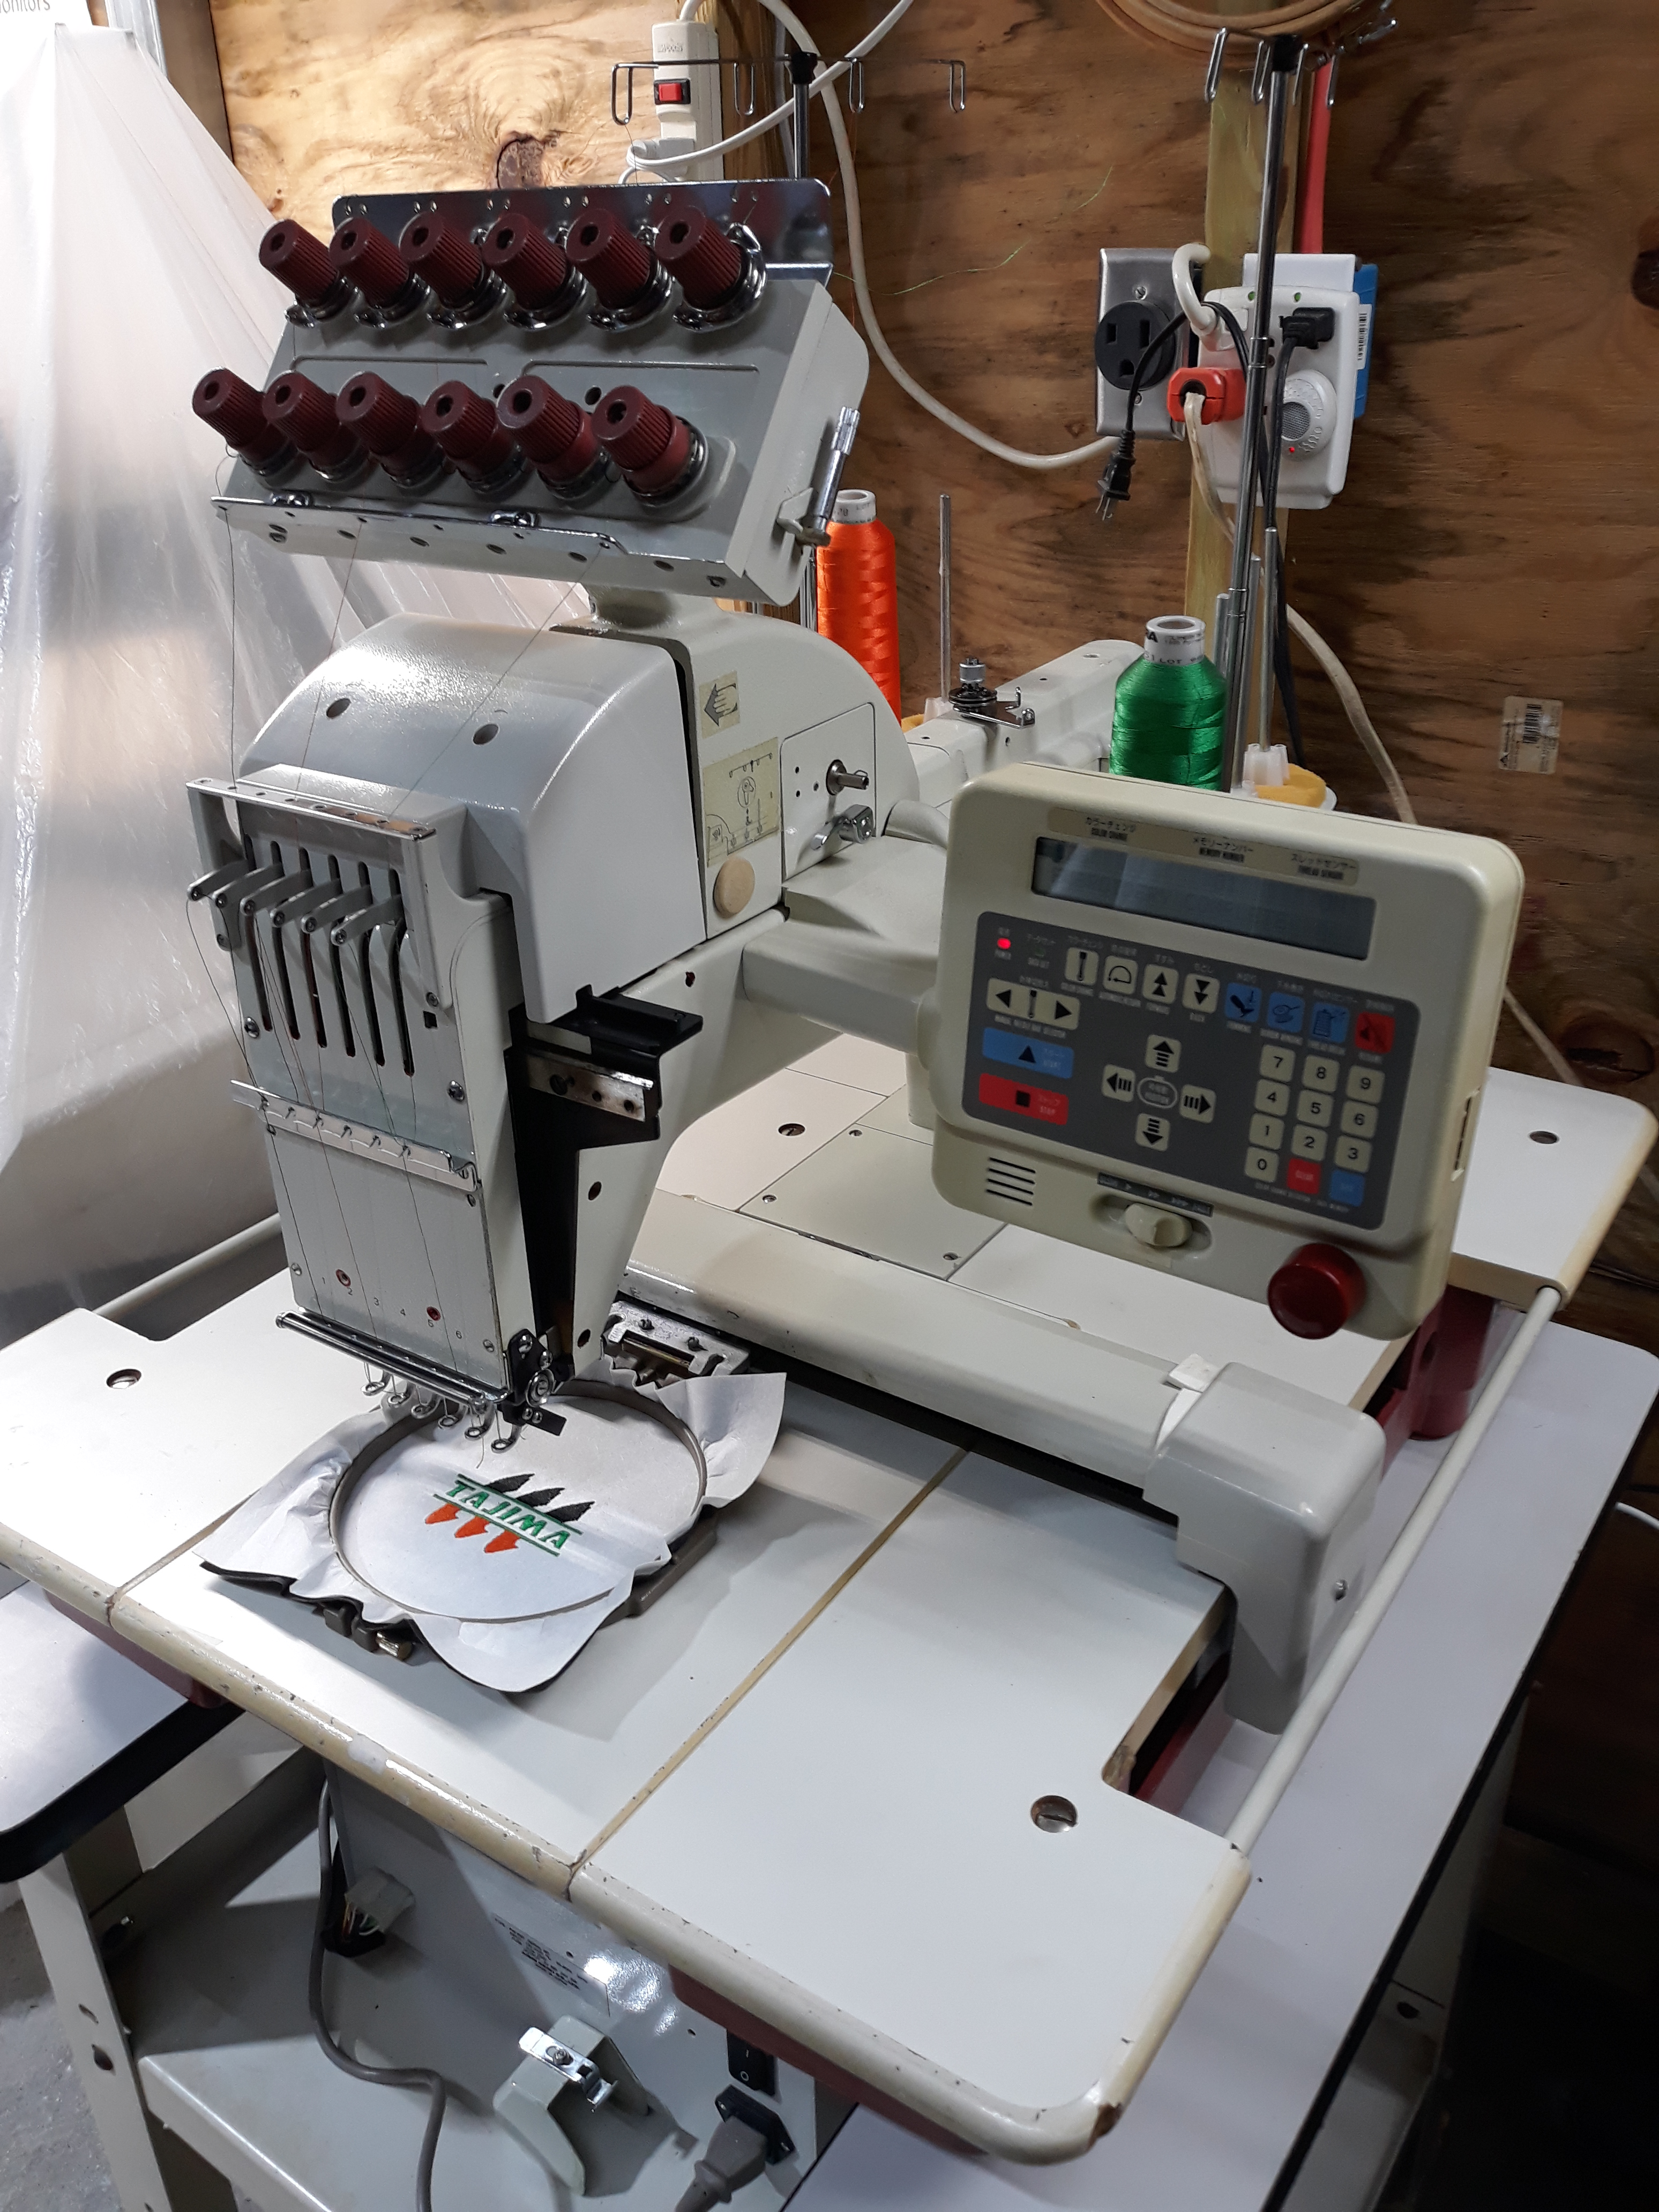 Toyota Expert ESP AD800 commercial embroidery machine w